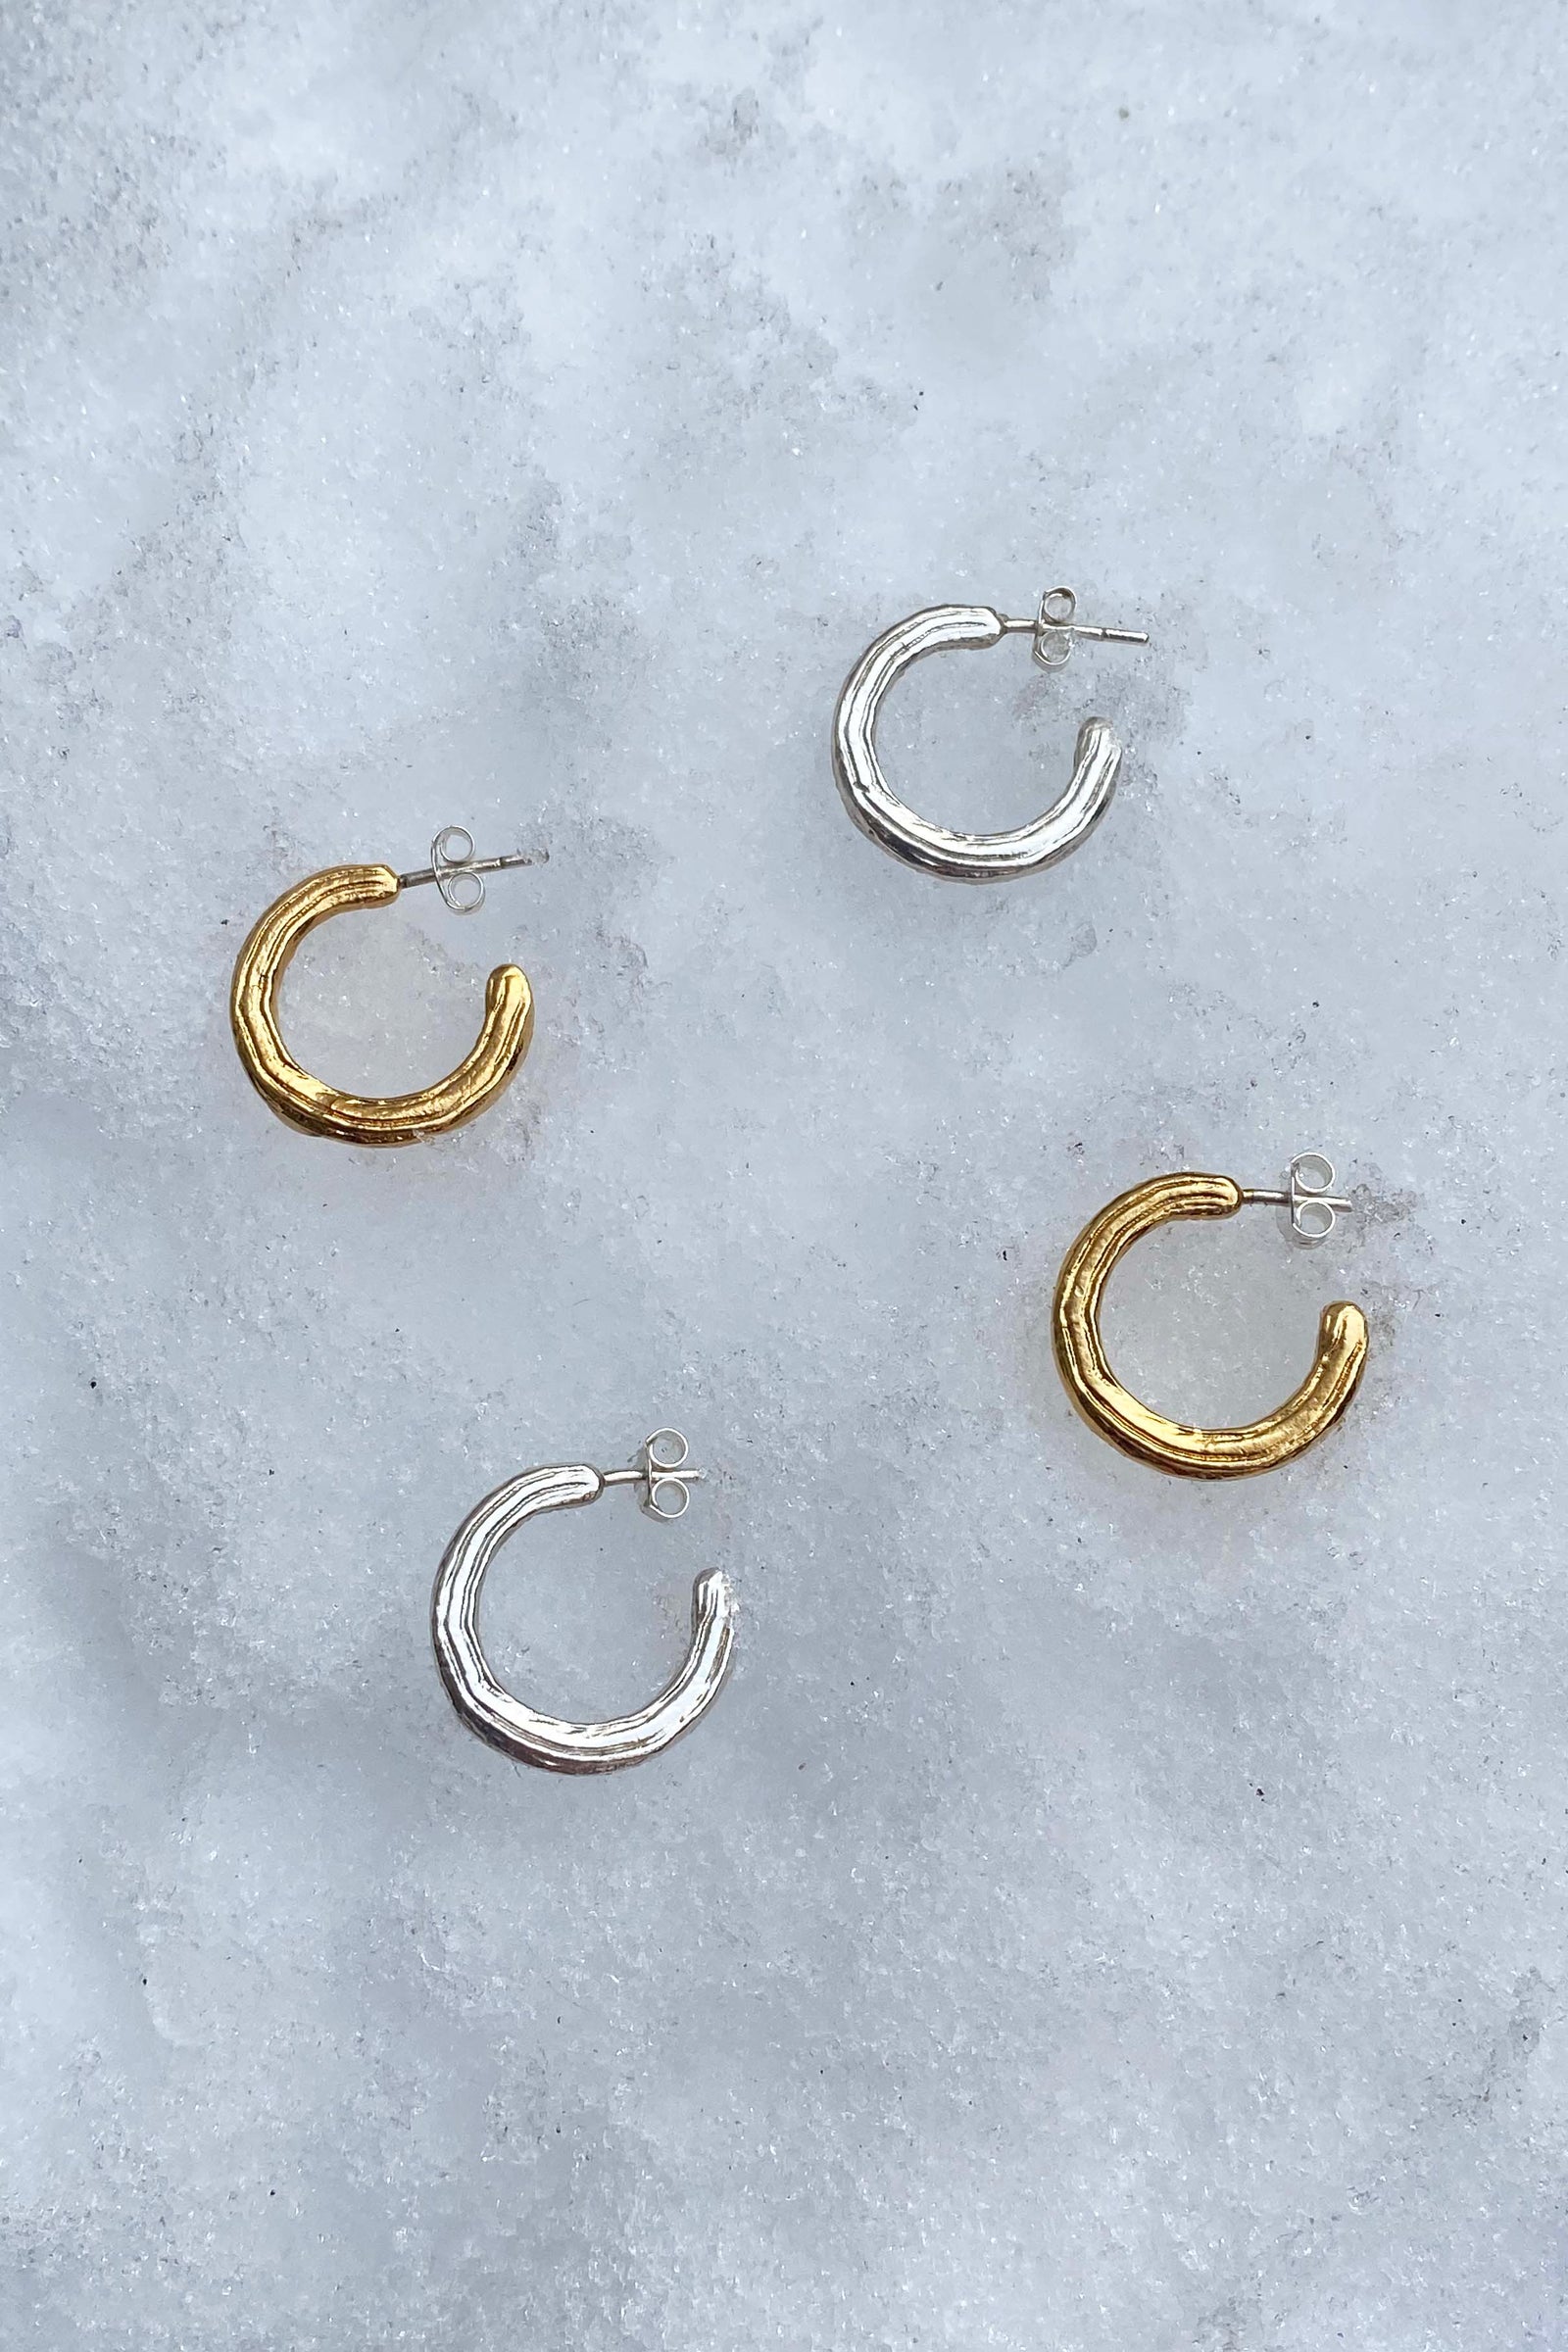 ETCHED HOOPS IN GOLD OR SILVER